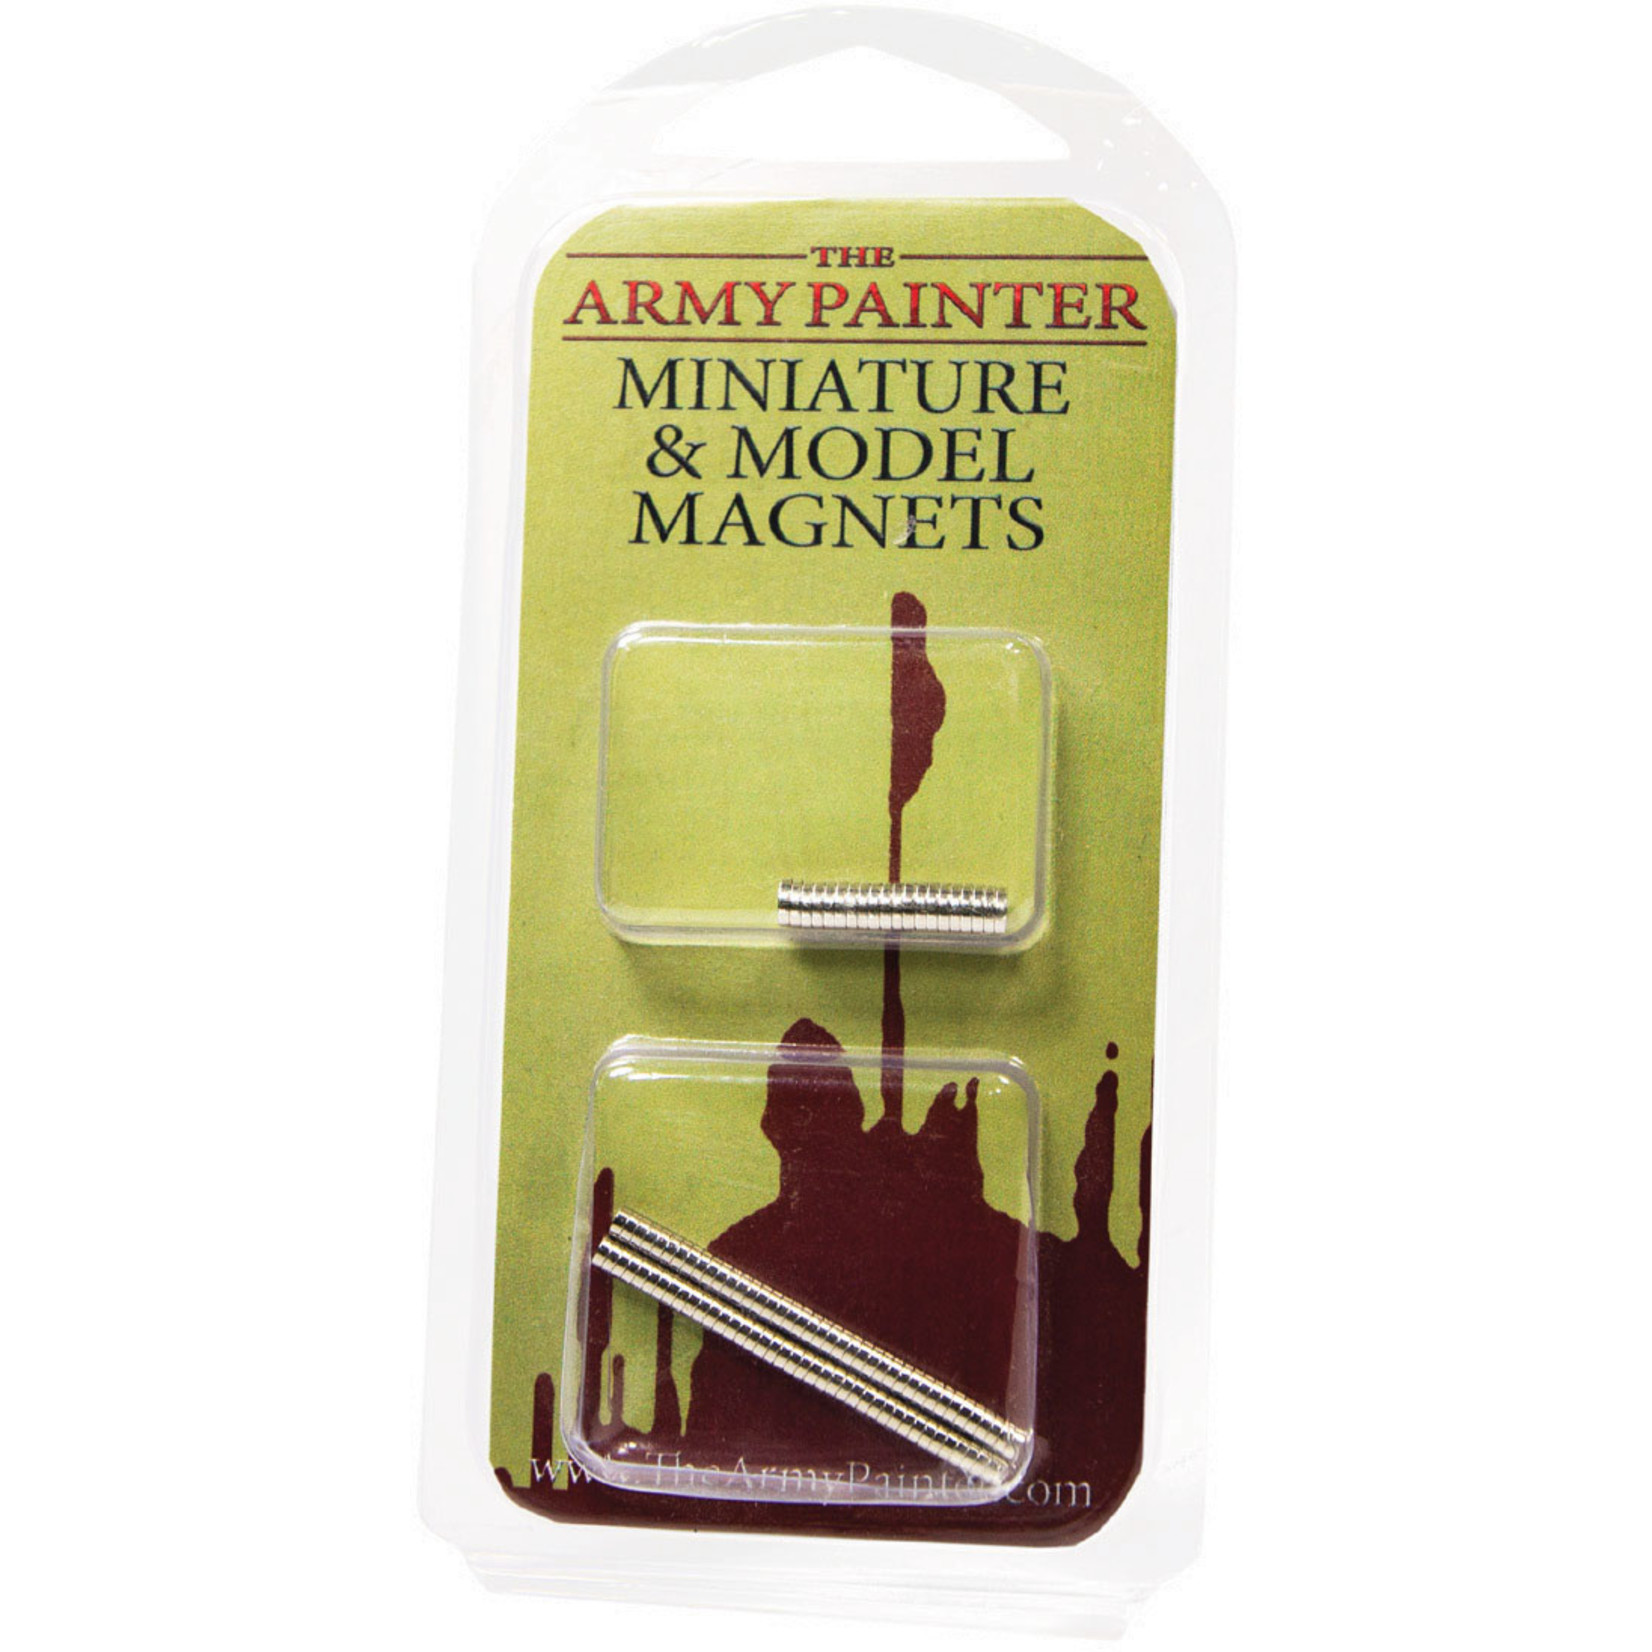 The Army Painter Miniature & Model Tools: Miniature & Model Magnets